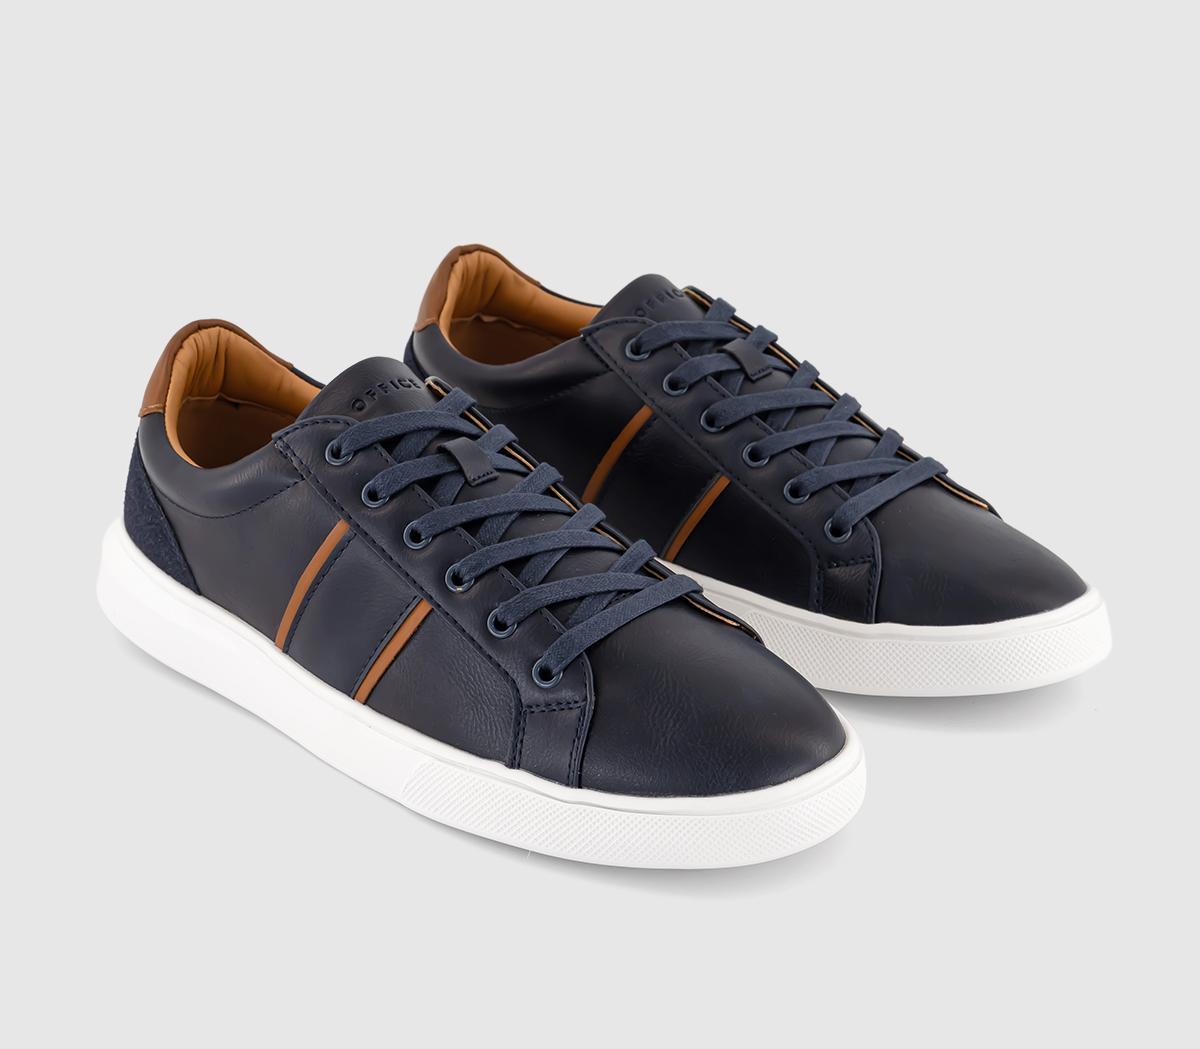 OFFICE Mens Cade Side Stripe Trainers Navy Blue, 8